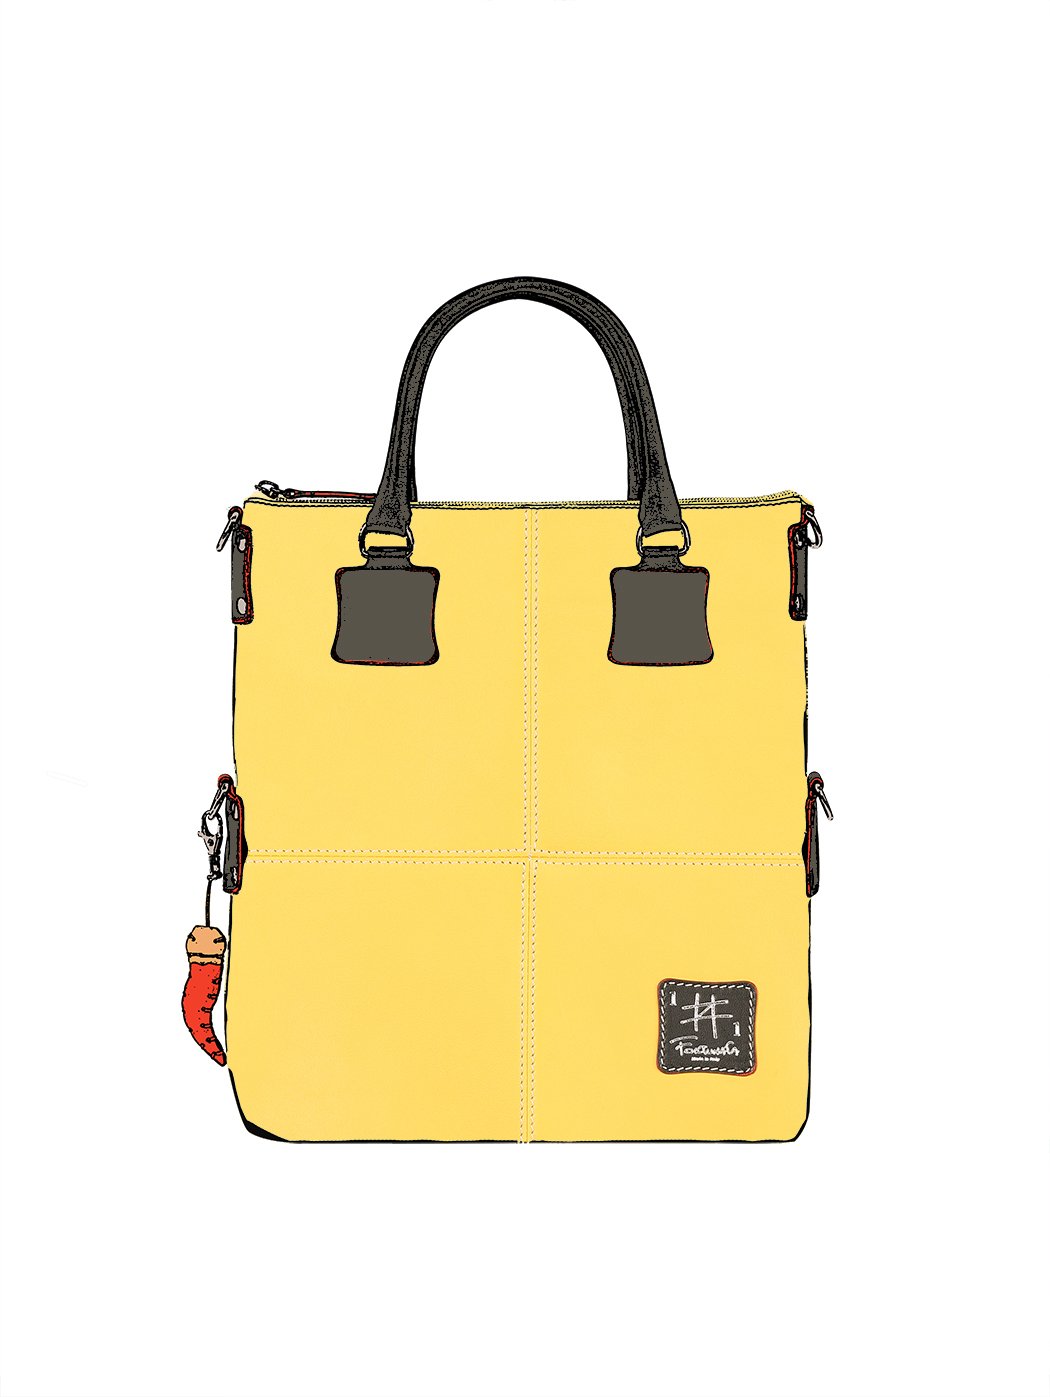 Large Tote Bag Leather Yellow - Handmade in Italy